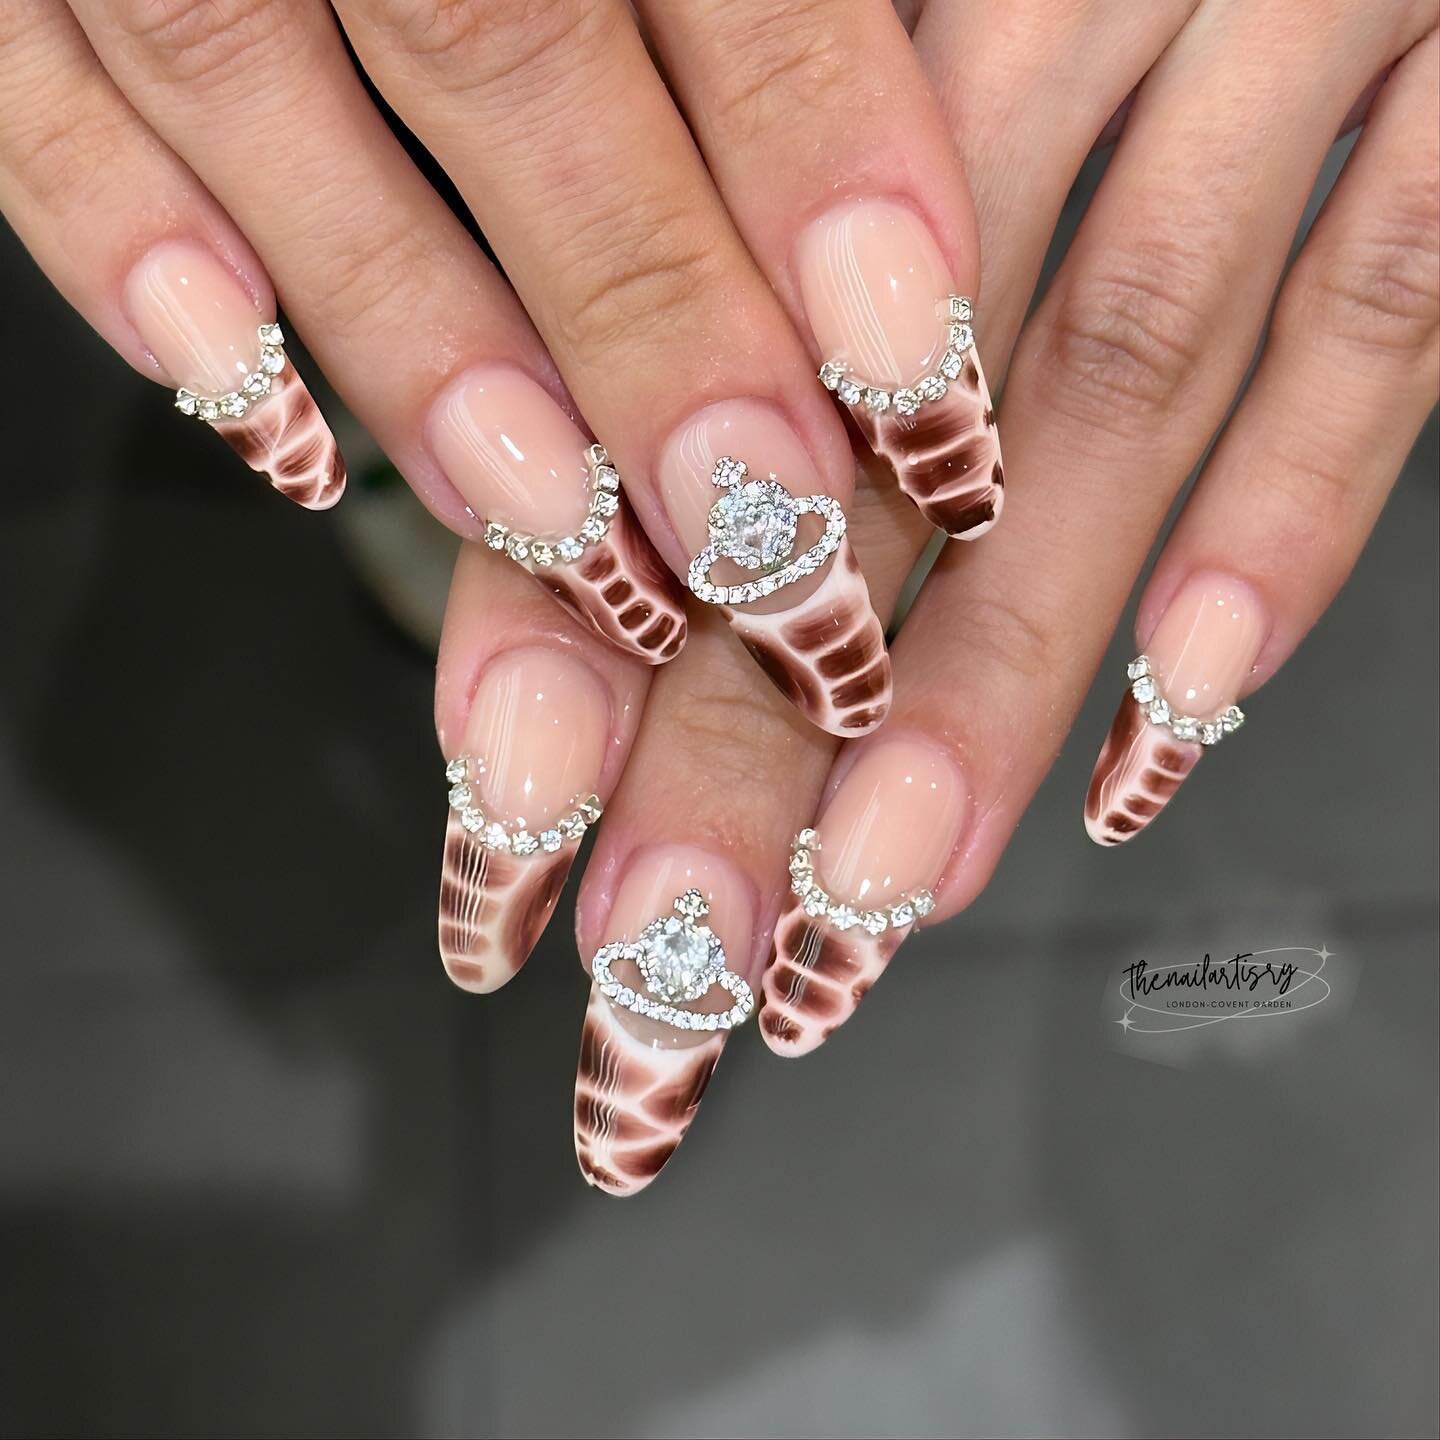 Ssslaying with these snake prints nails done with diamond chains liners &amp; Vivienne Westwood inspired nails charm 🐍💎🔥

📲 To Book In: Visit the link in bio &amp; we strongly recommend to book in if you want to do any intricate or bespoke nails 